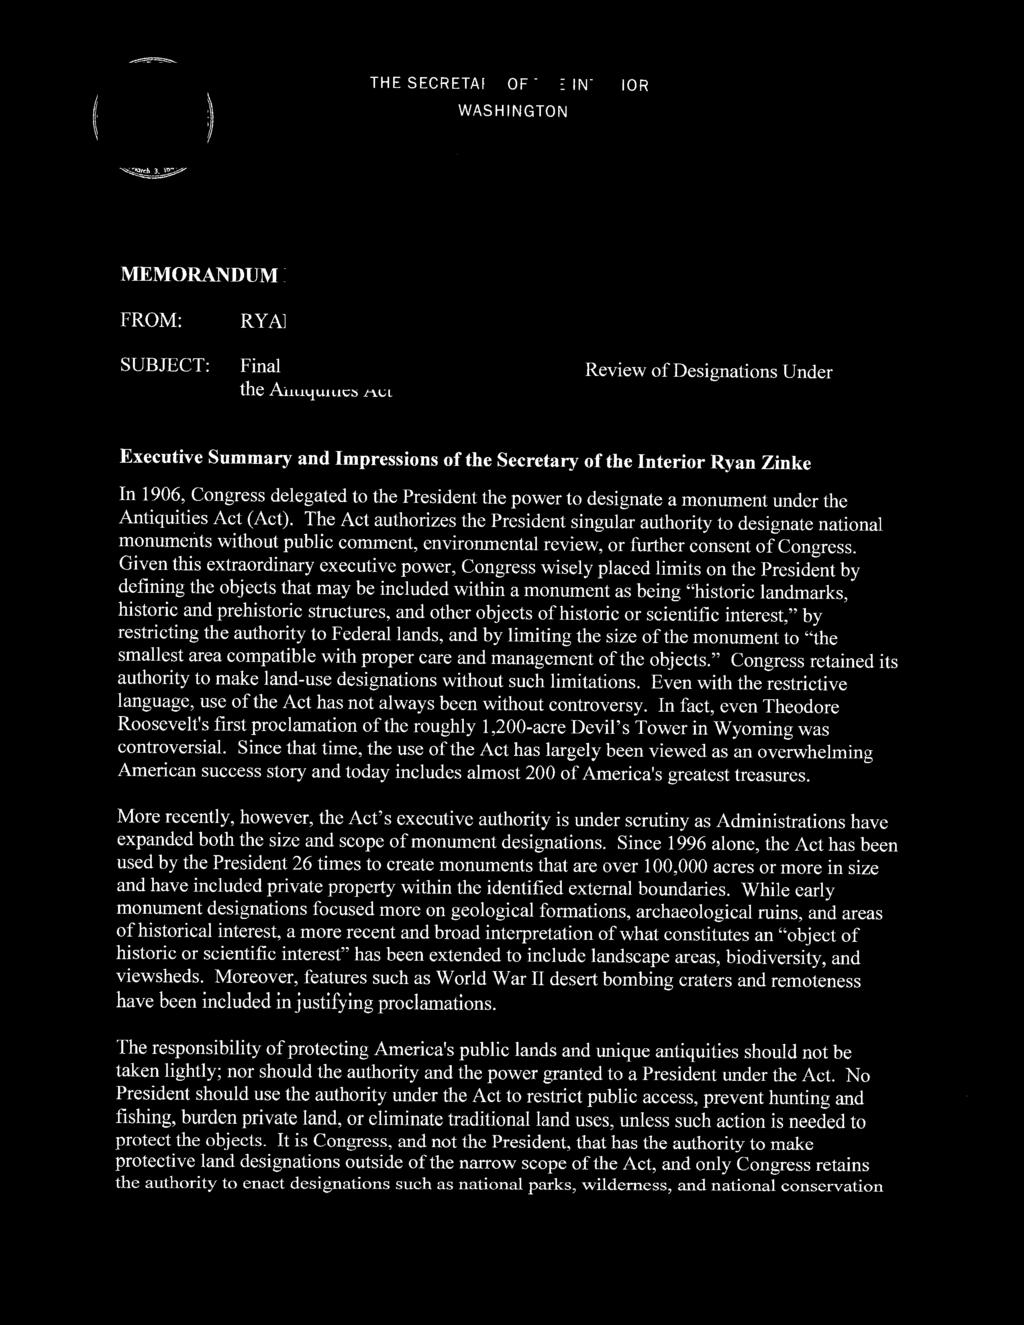 THE SECRETARY OF THE INTERIOR WASHINGTON MEMORANDUM F FROM: SUBJECT: Final Report Summa z g Findings of the Review of Designations Under the Antiquities Act Executive Summary and Impressions of the